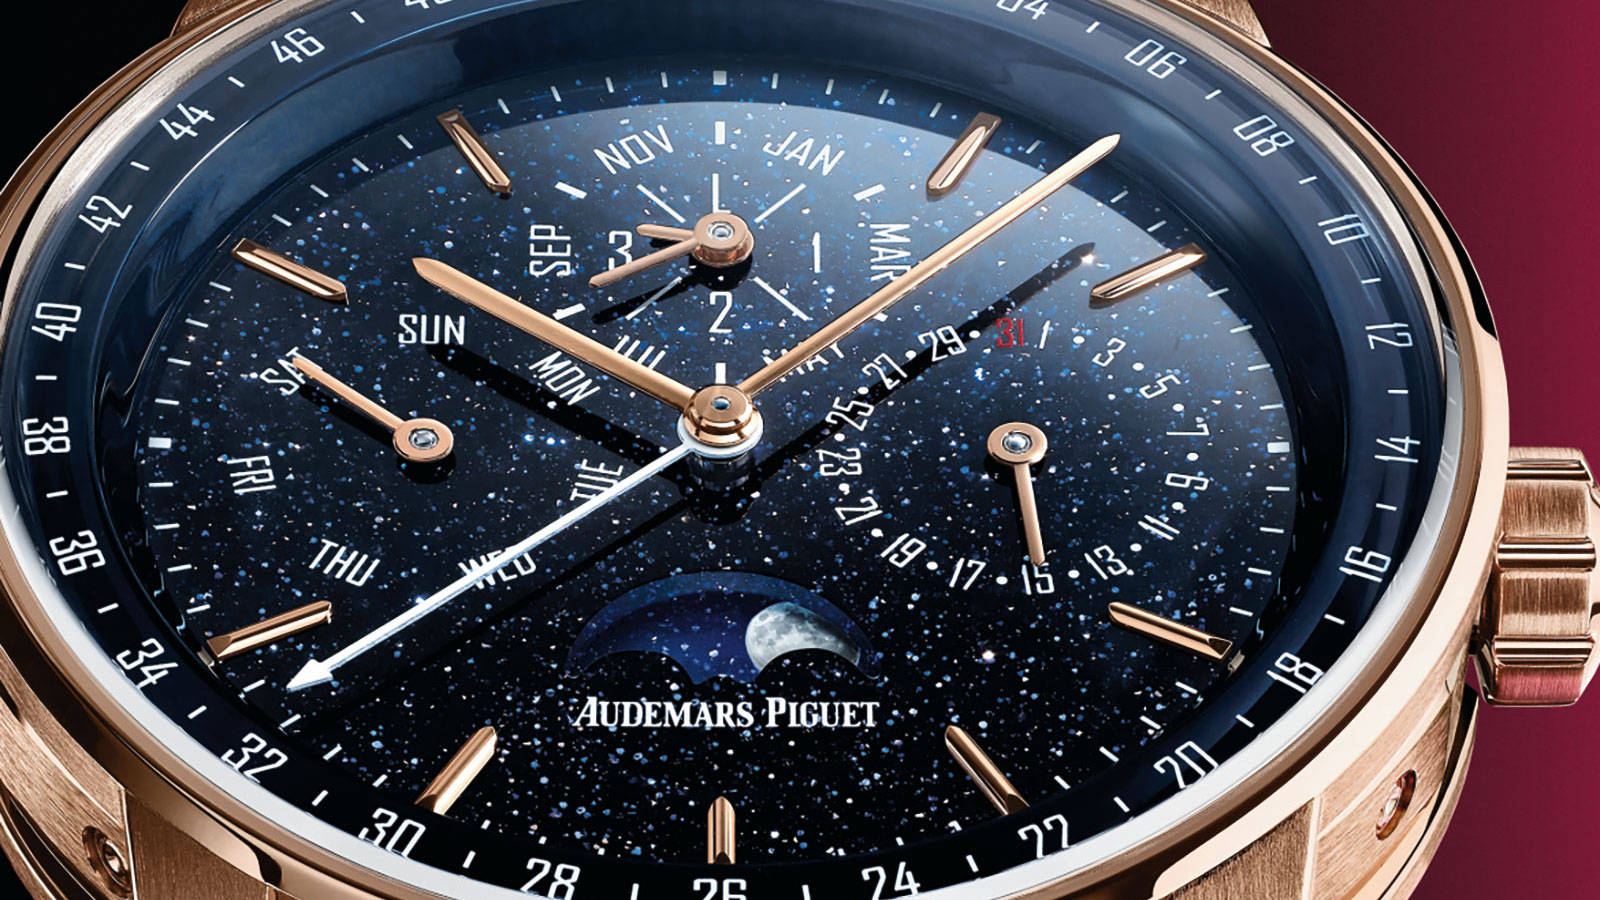 Swatch Group, Allied With Audemars Piguet, Announces Sophisticated  Nivachron Technology